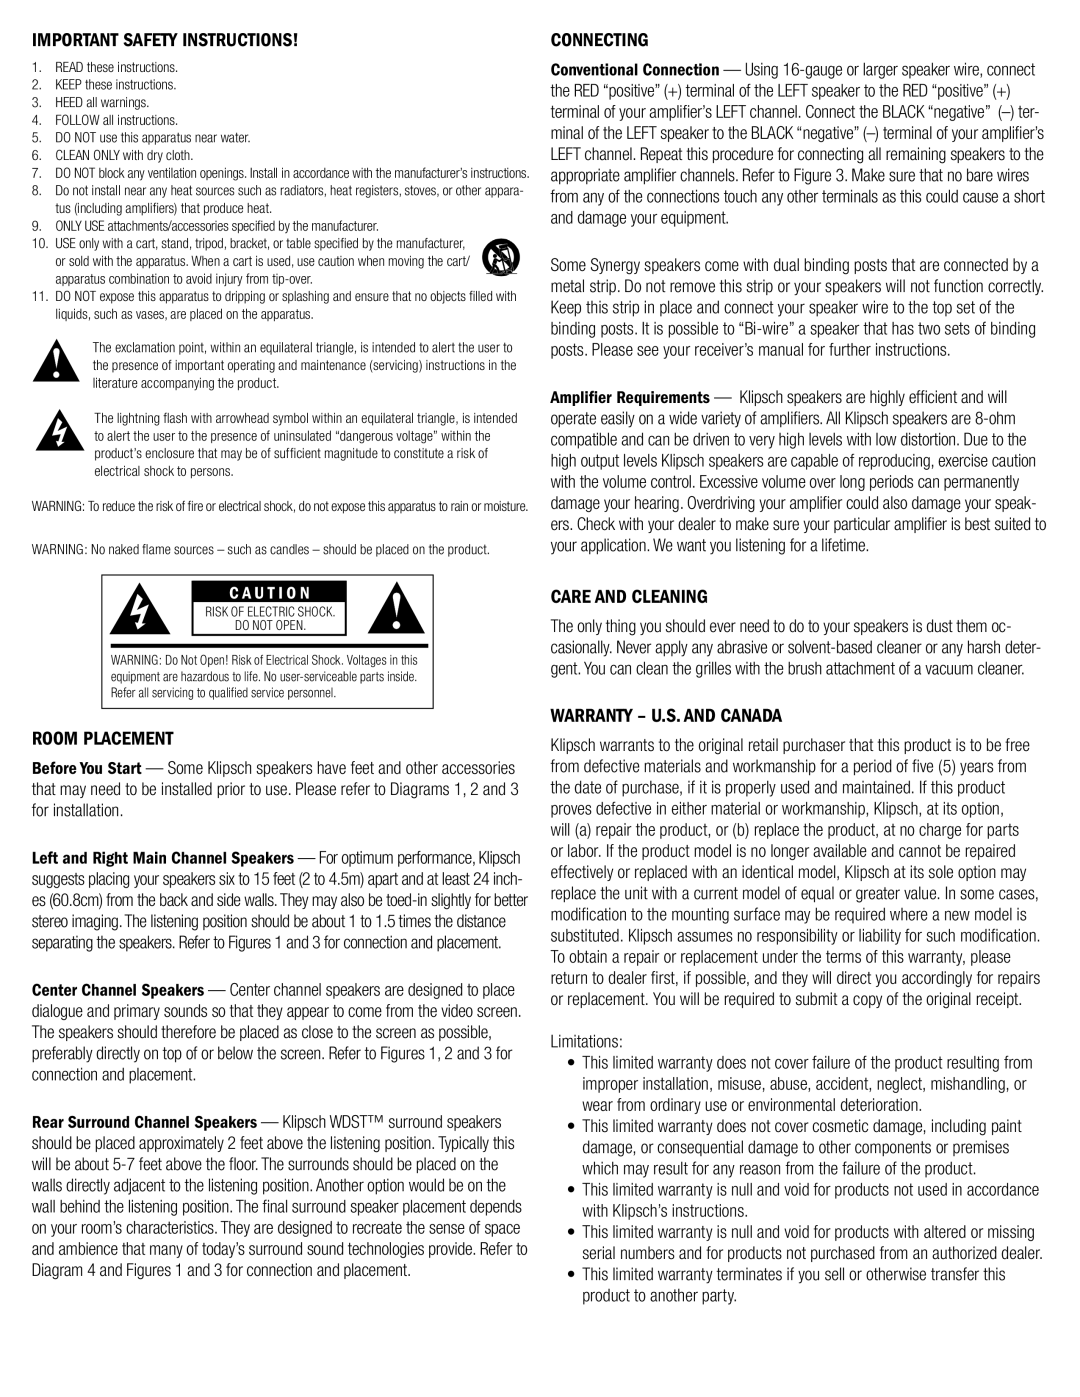 Klipsch SYNERGY-F-30 Important Safety INSTRUCTIONS, Room Placement, Connecting, Care And Cleaning, C A U T I O N 